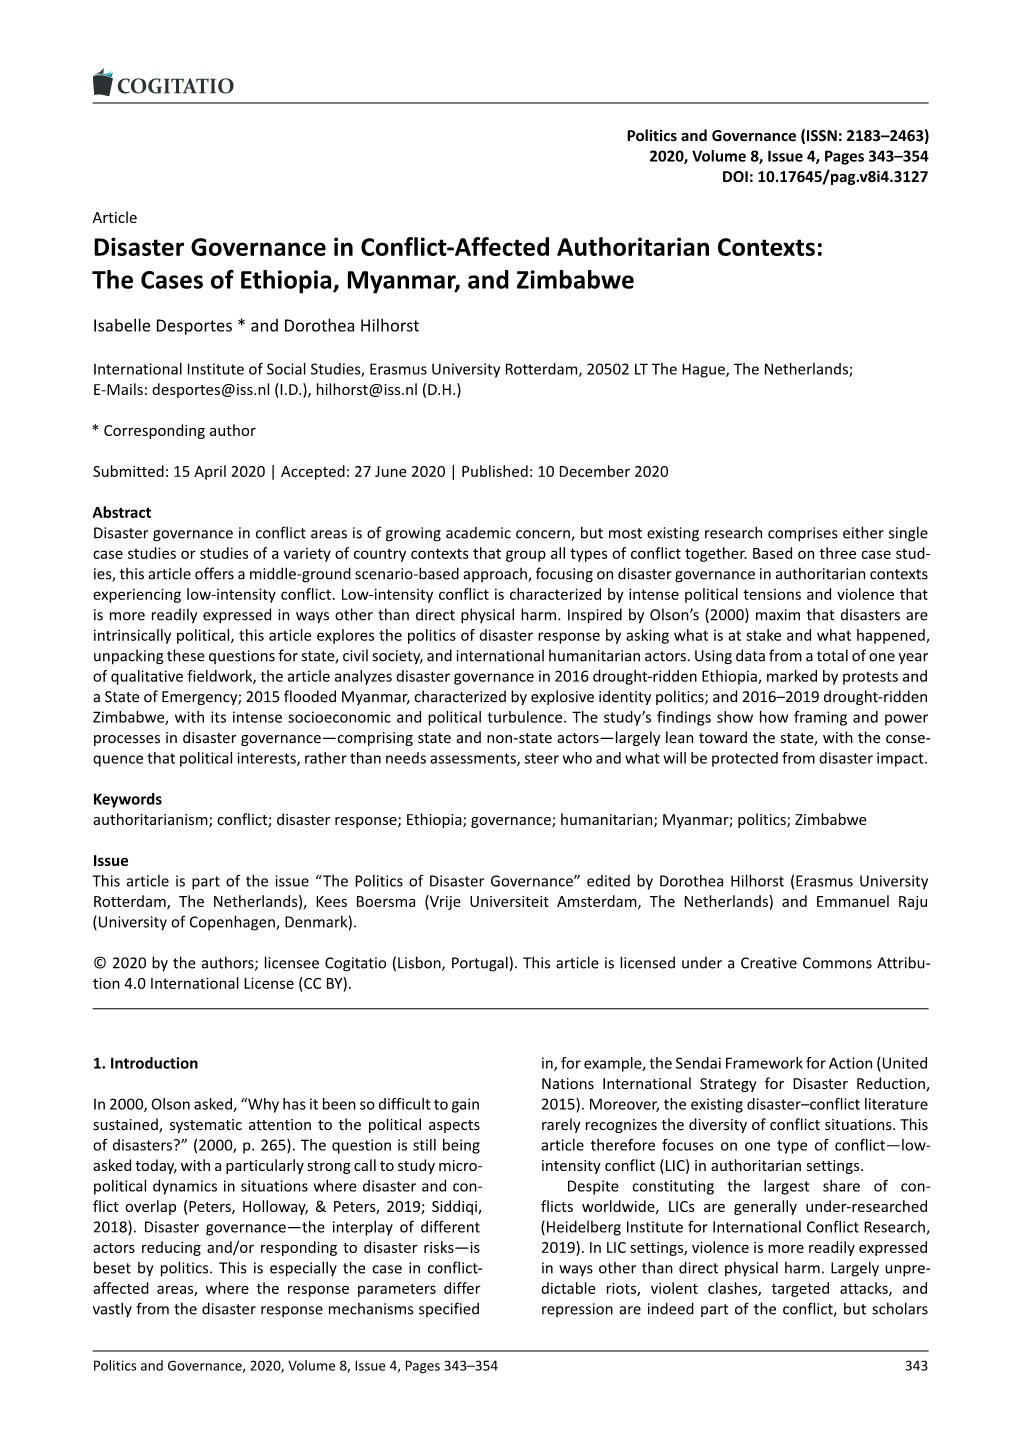 Disaster Governance in Conflict-Affected Authoritarian Contexts: the Cases of Ethiopia, Myanmar, and Zimbabwe